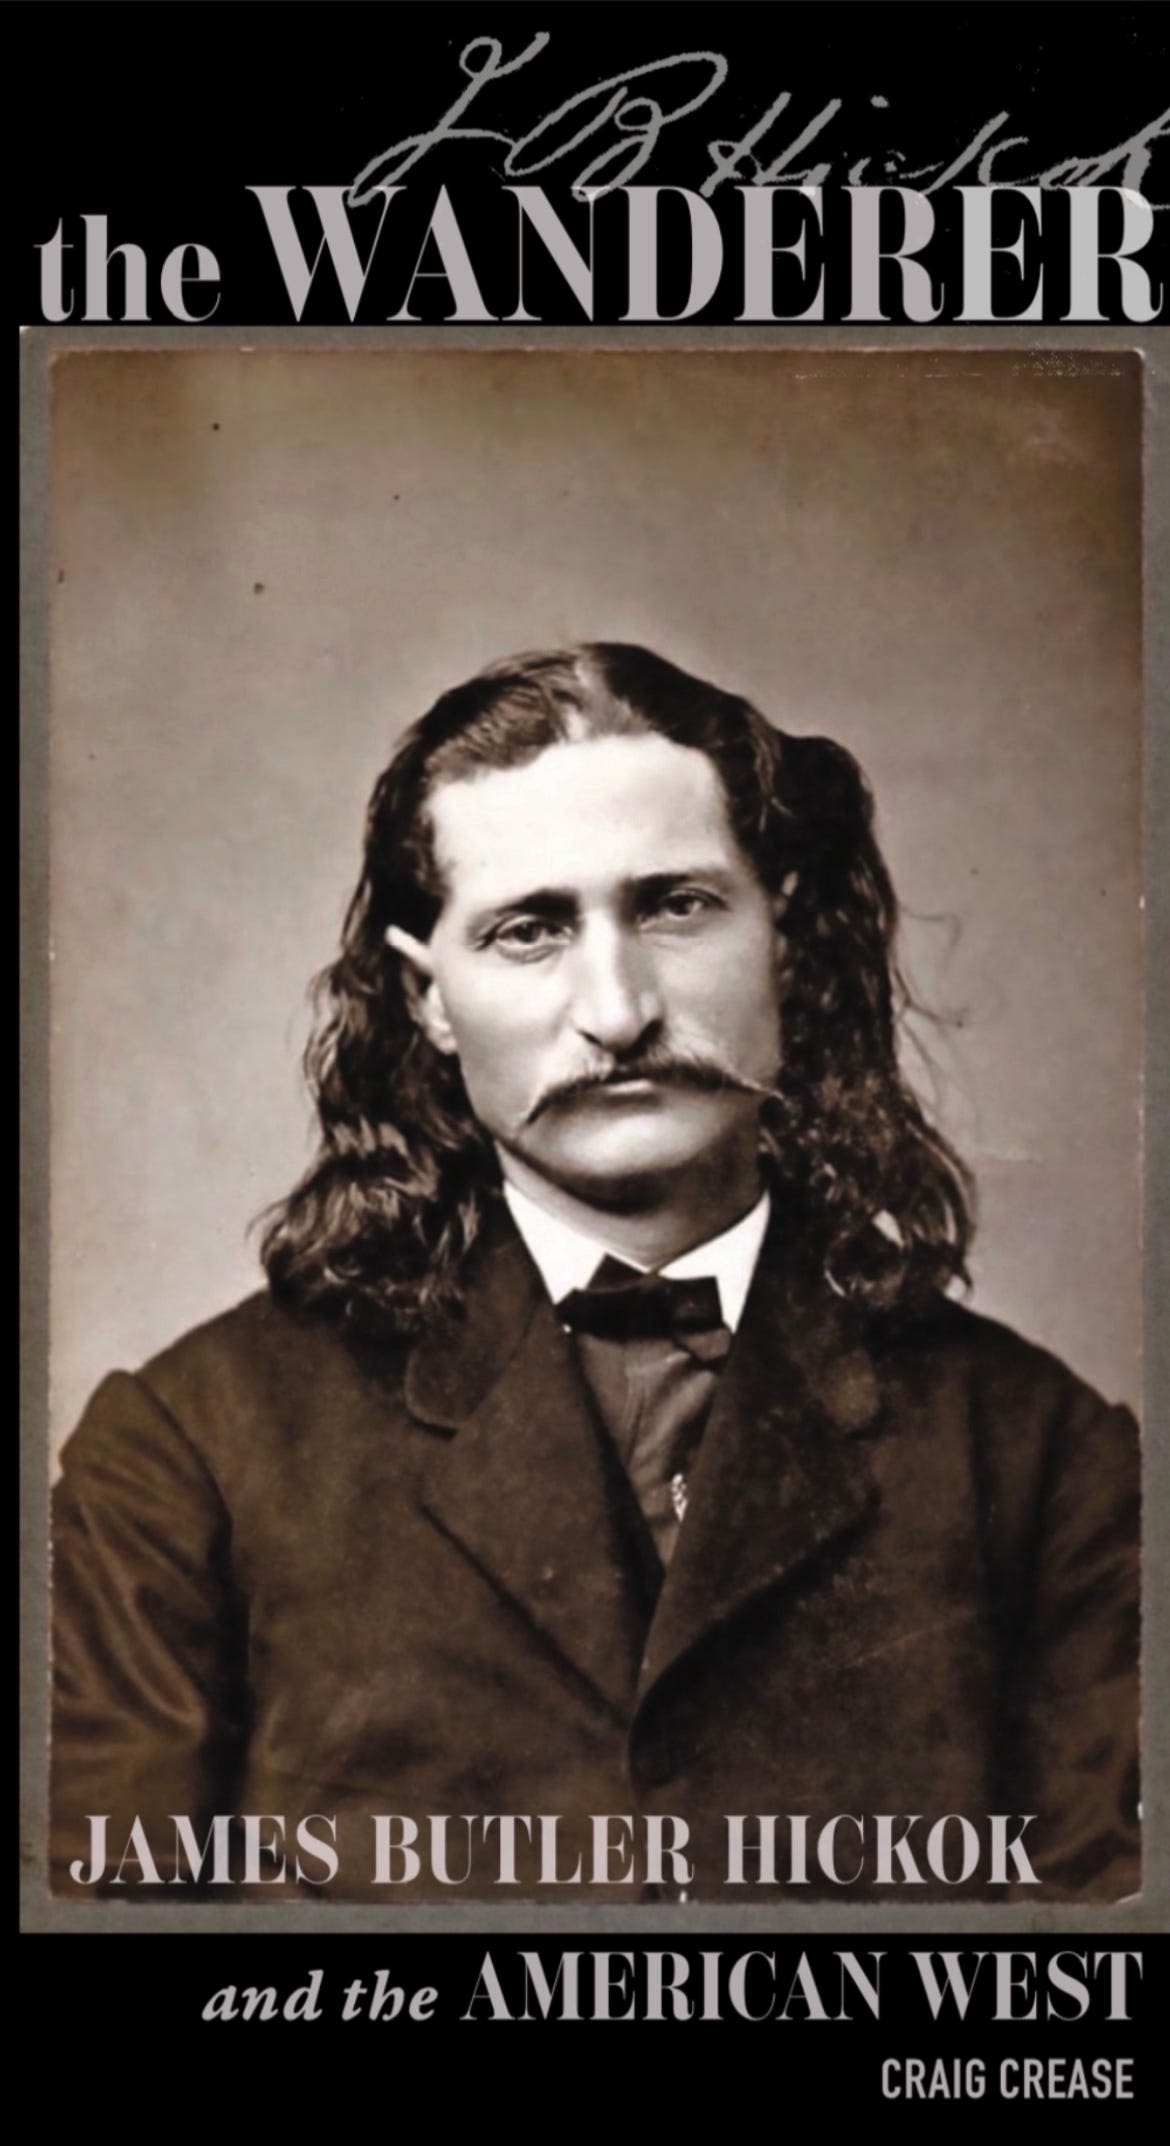 New biography about 'Wild Bill' Hickok debunks popular myths about the American gunman